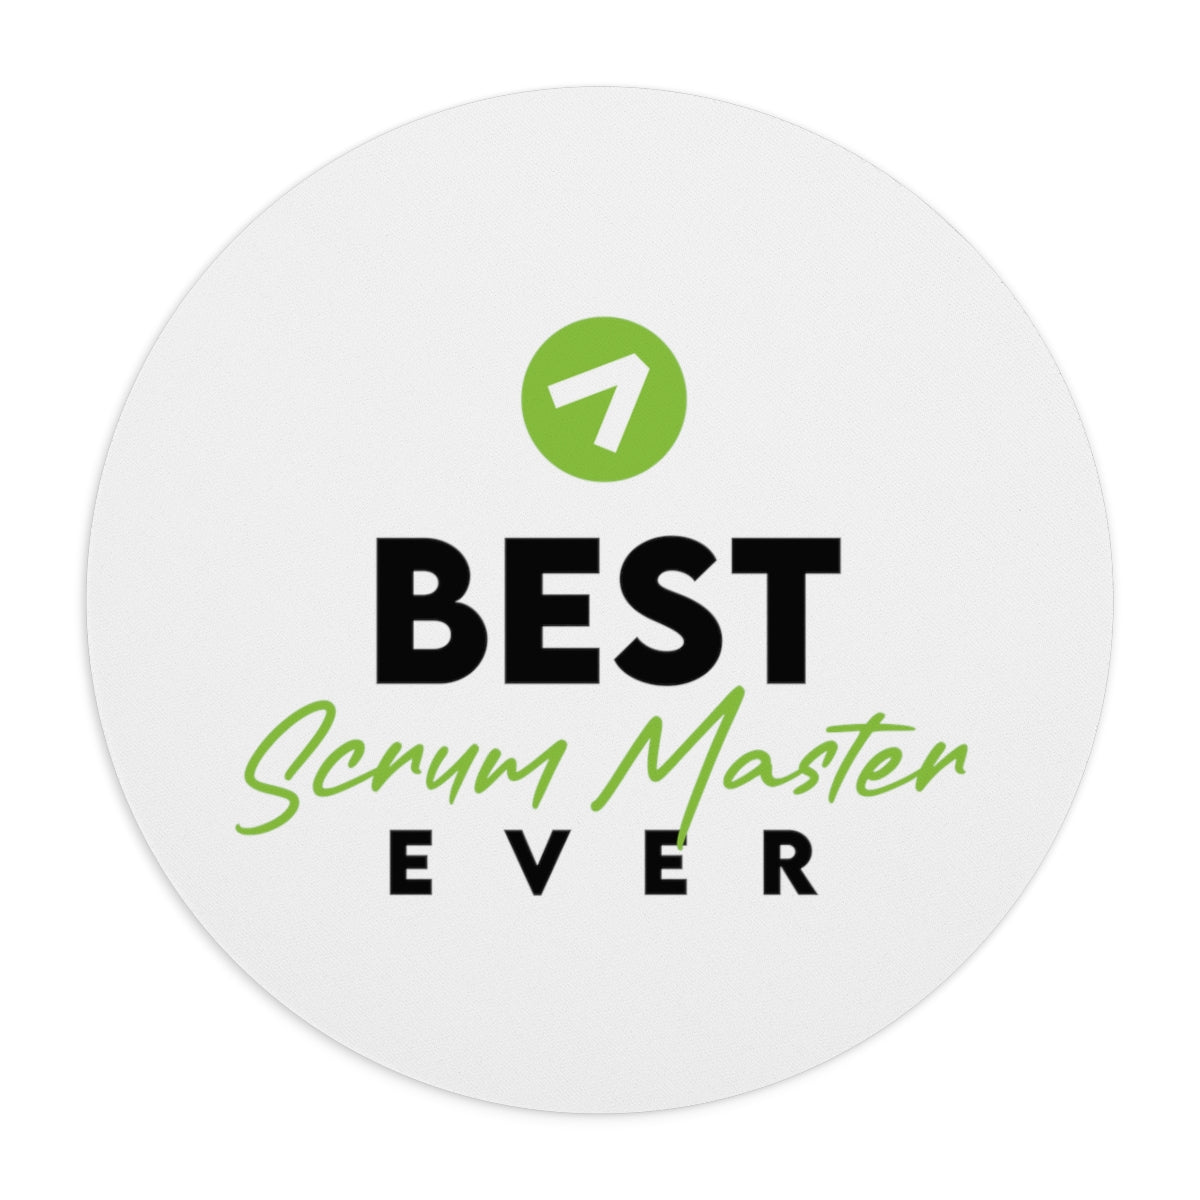 Best Scrum Master ever - Green - Mouse Pad